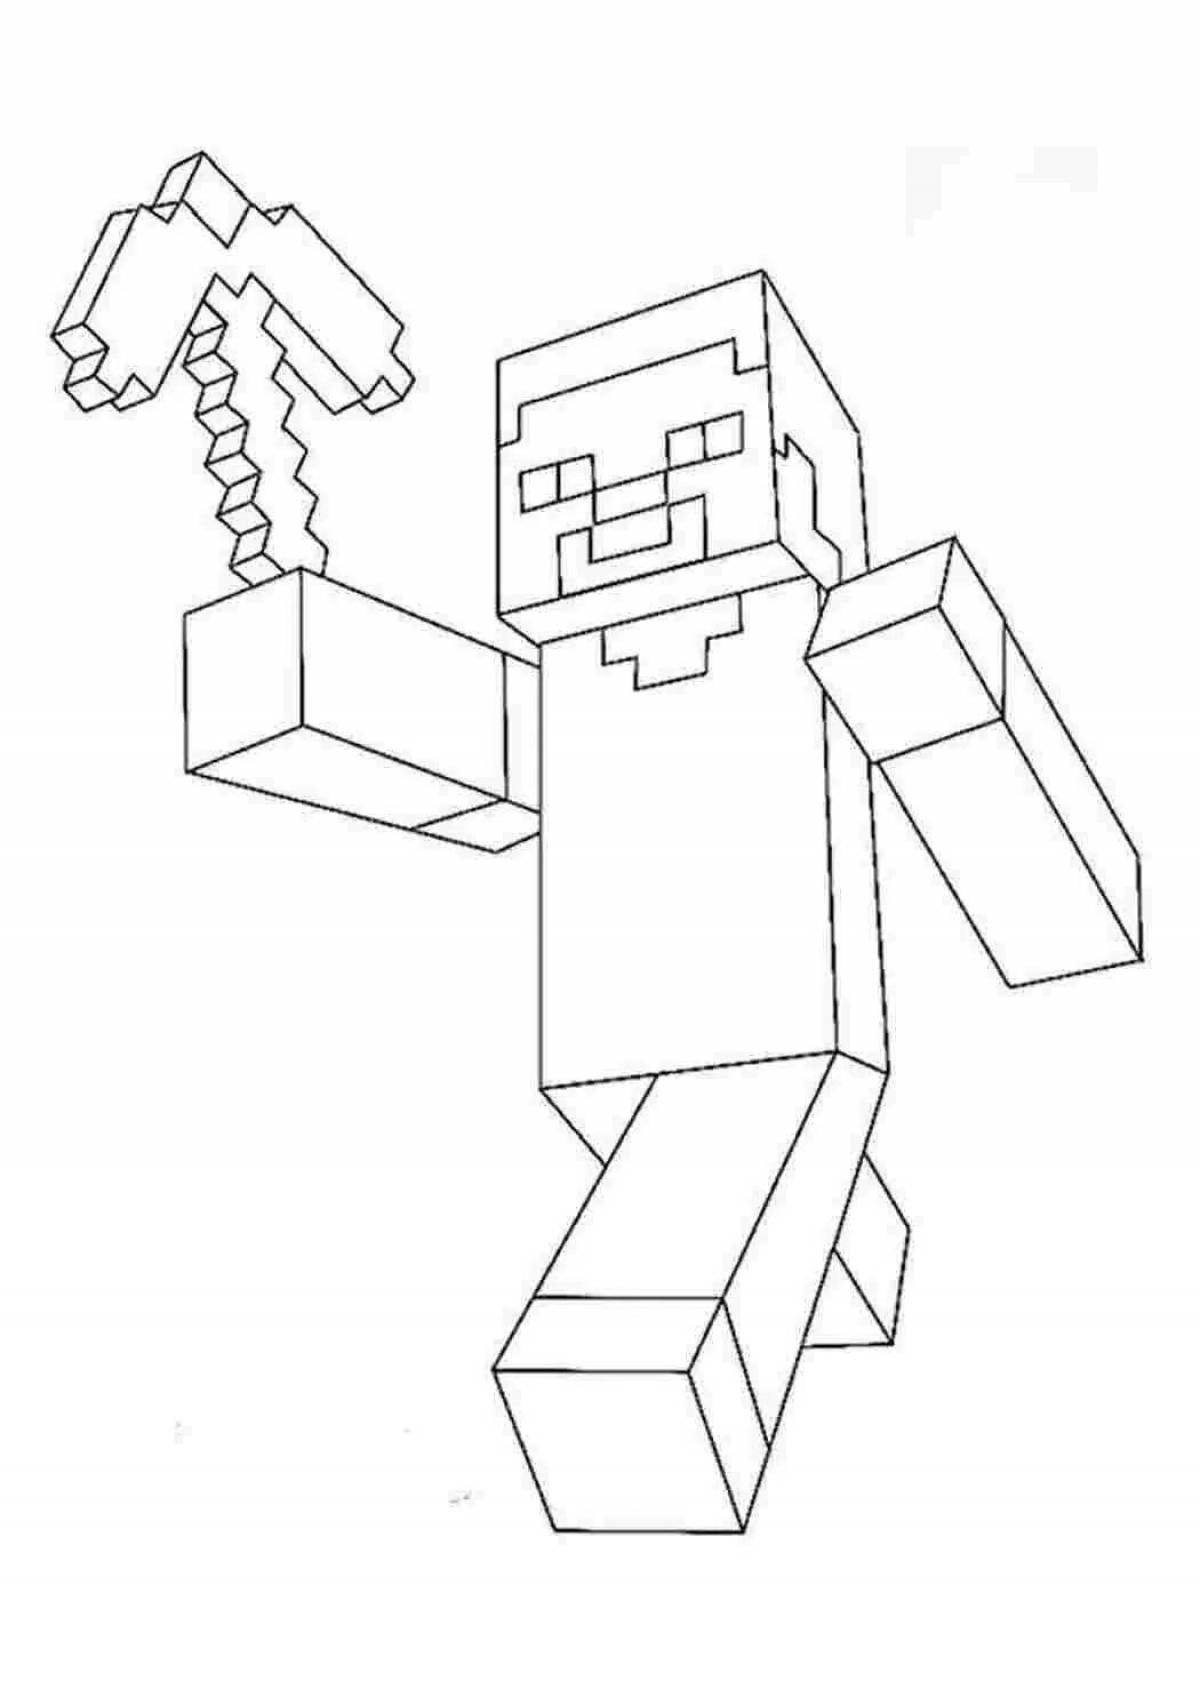 Joyful minecraft coloring for boys 6-7 years old